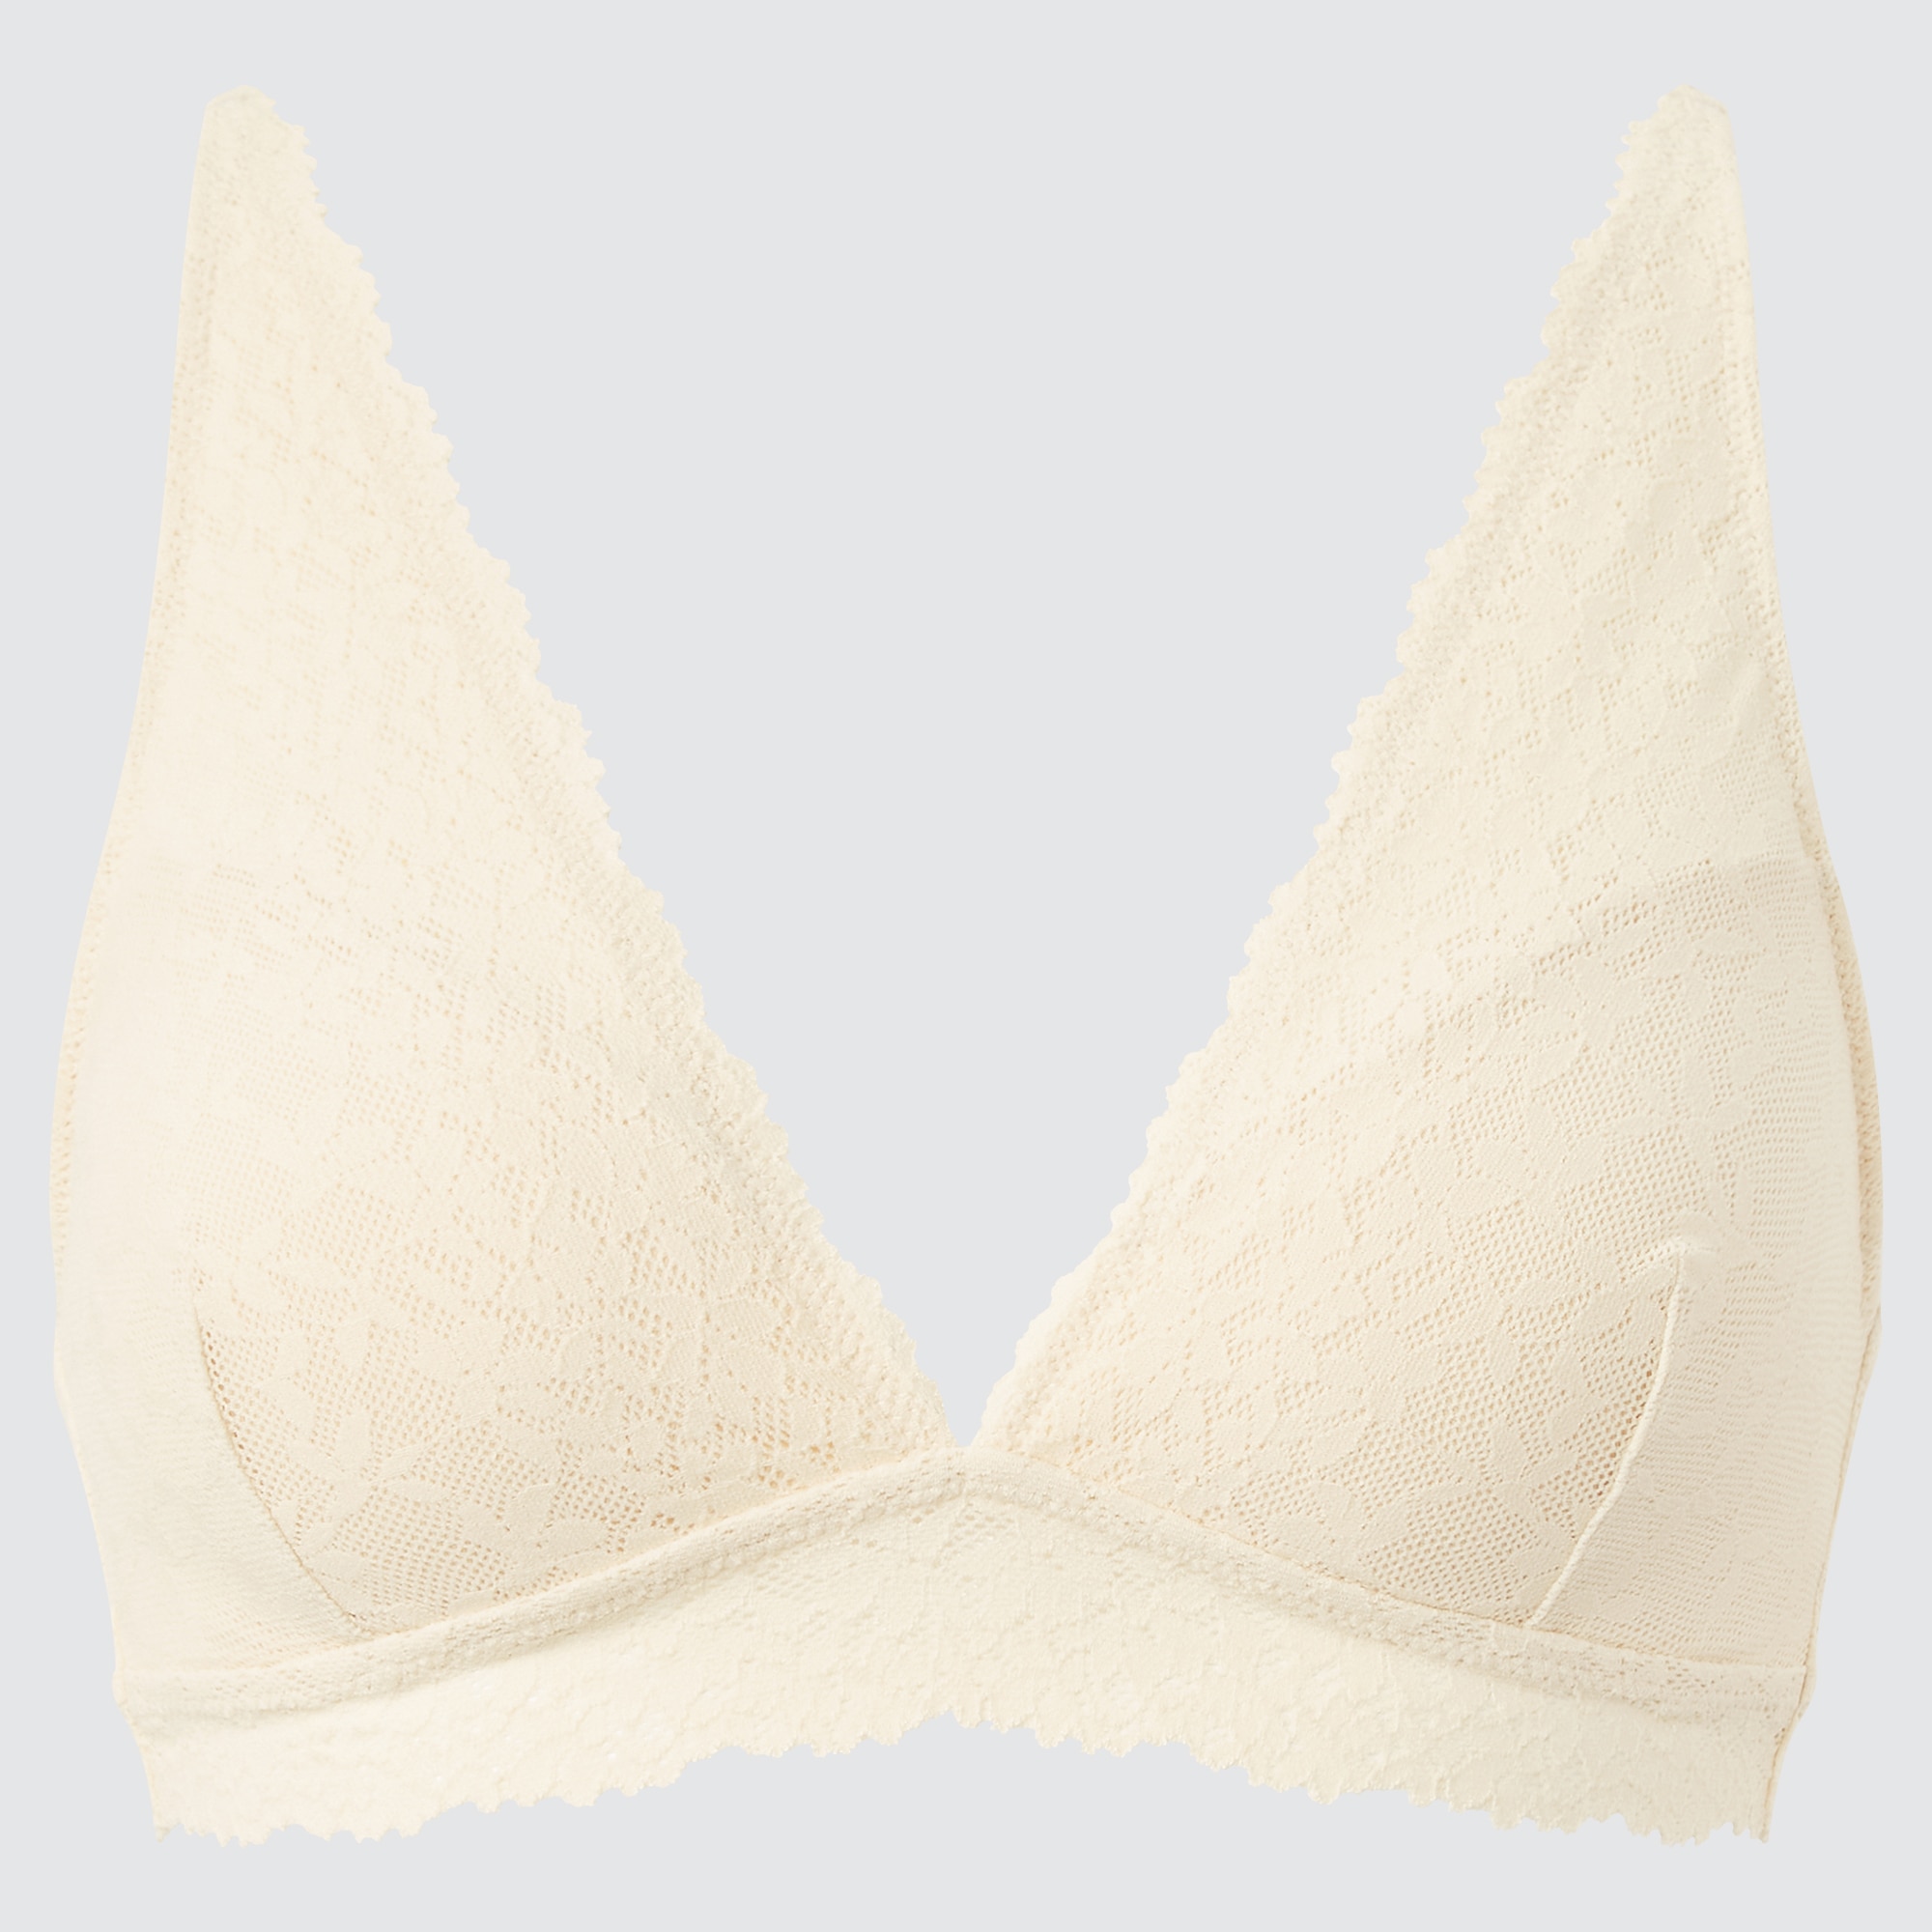 Wireless Bra (Plunging Relax, Lace)